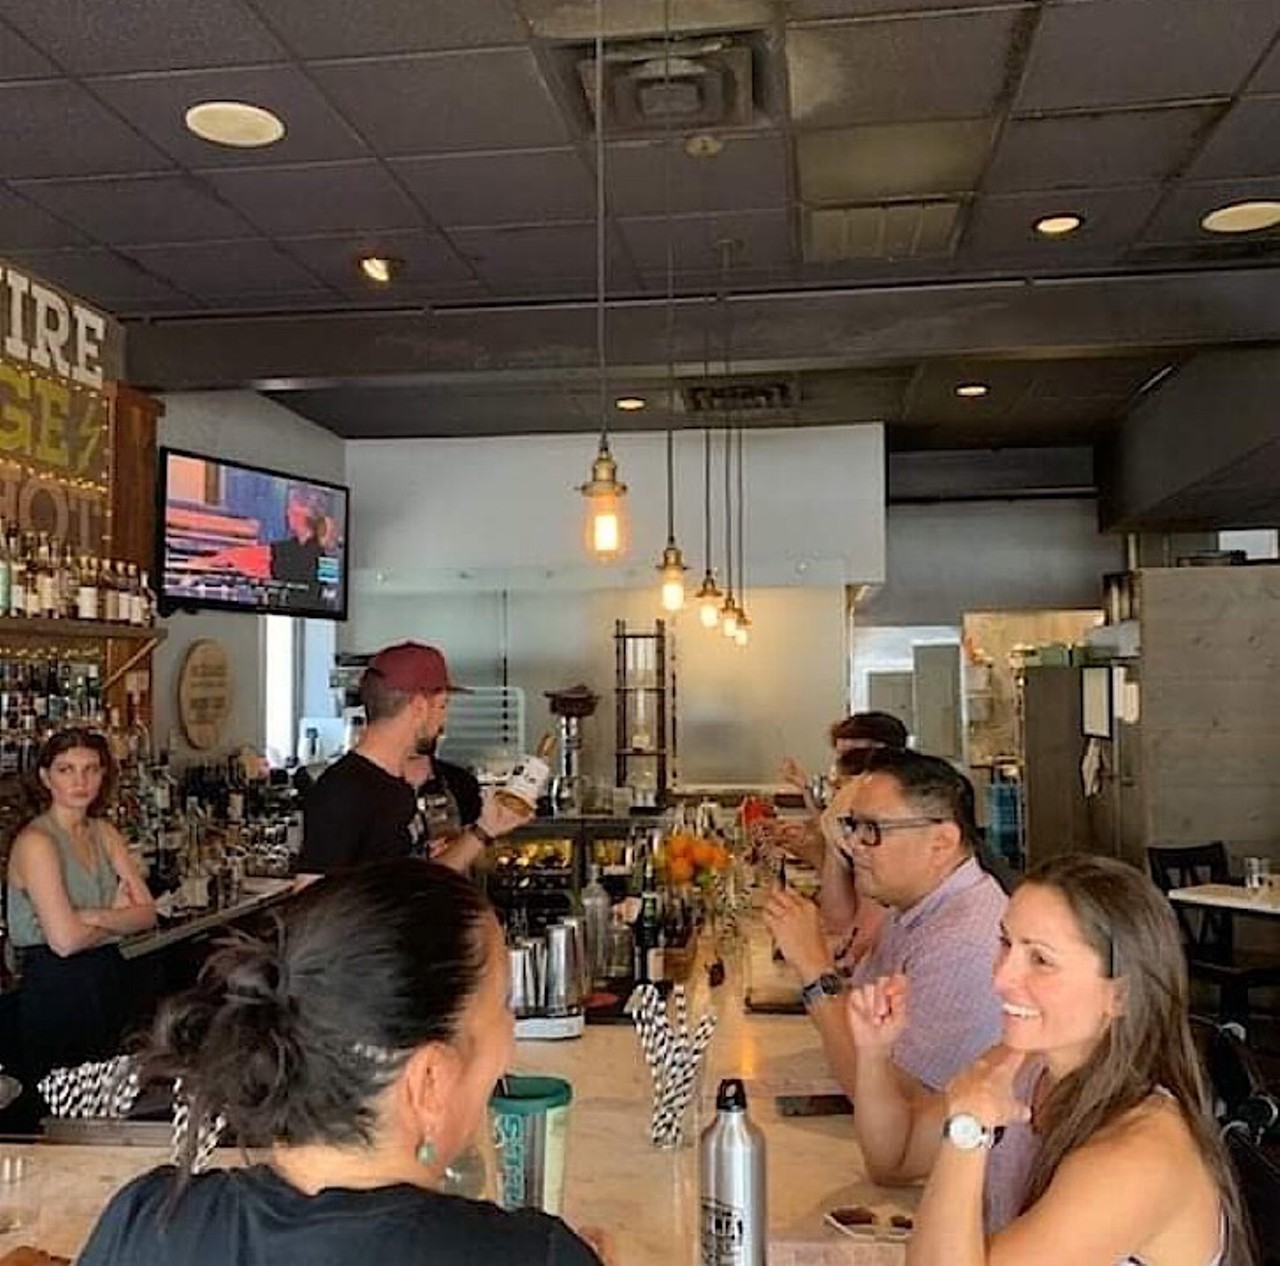 Edison: Food + Drink Lab  
912 W Kennedy Blvd, Tampa, 813-254-7111
Chef Jeannie Pierola, a James Beard Semifinalist, heads up this interesting restaurant. If you want to support local legendary chefs, this is the spot to hit up. 
Photo via Edison: Food + Drink Lab/Facebook